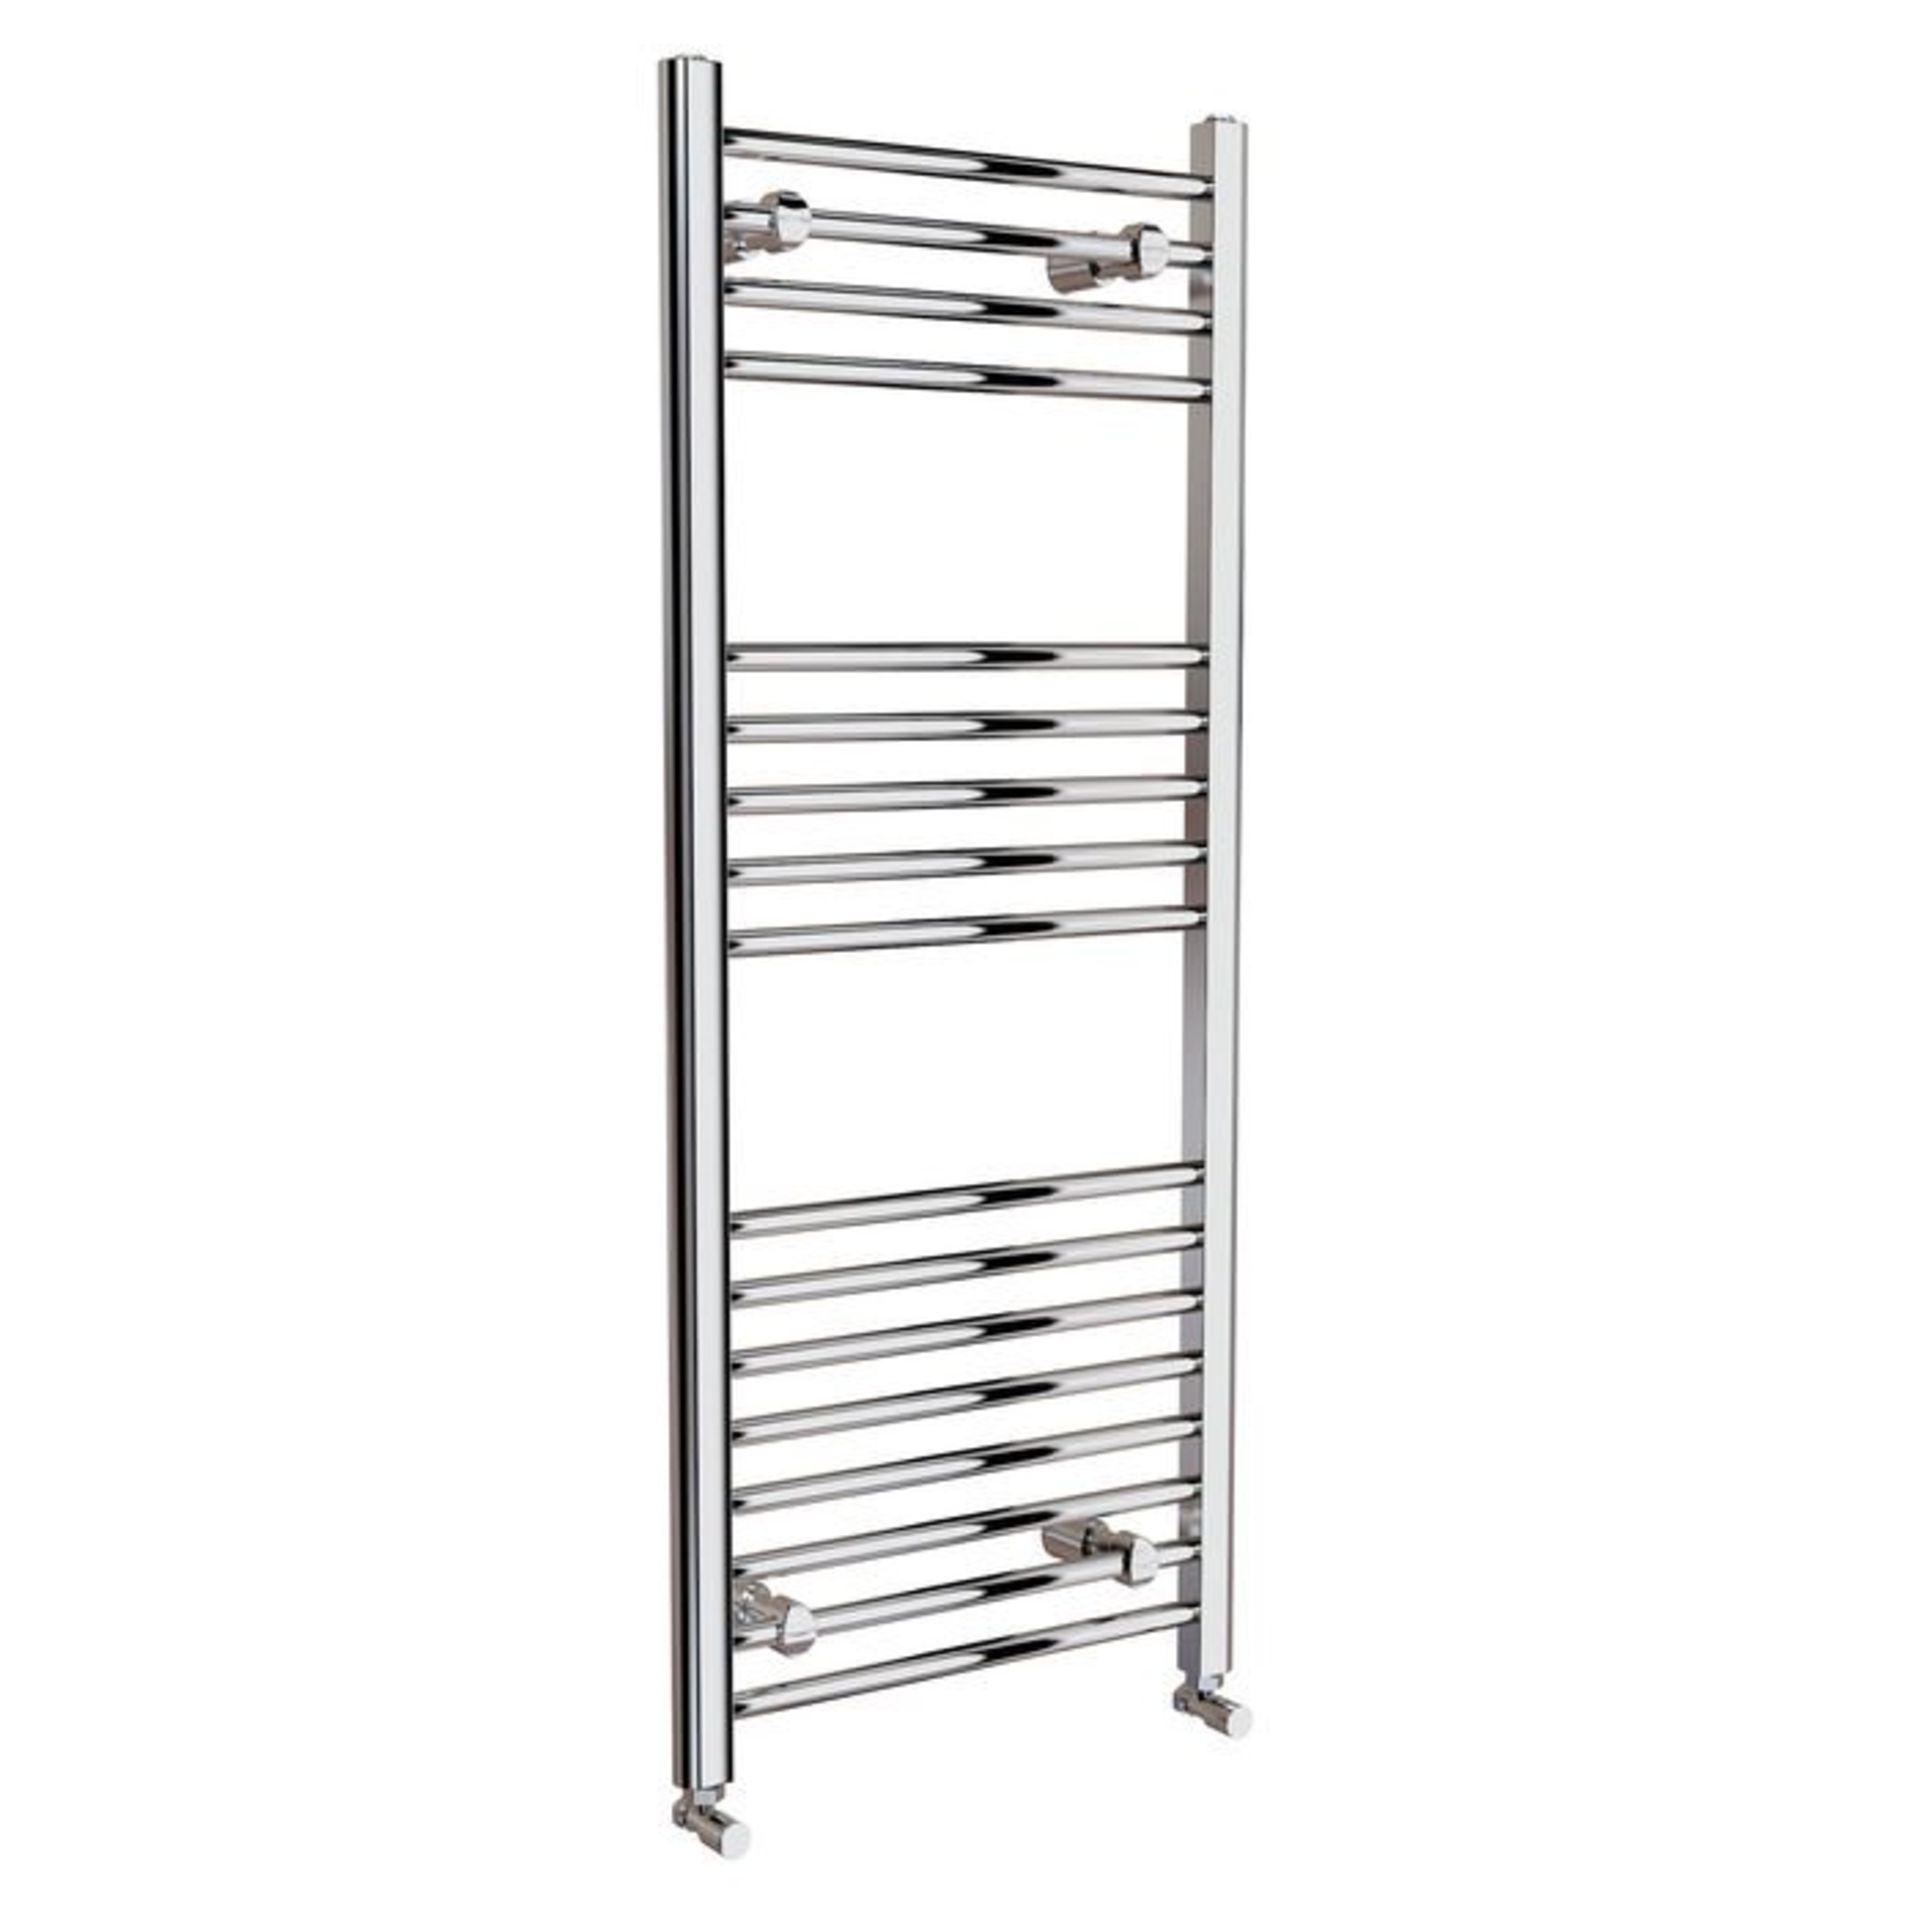 (G103) 1200x500mm - 20mm Tubes - Chrome Heated Straight Rail Ladder Towel Radiator. Low carbon steel - Image 3 of 3